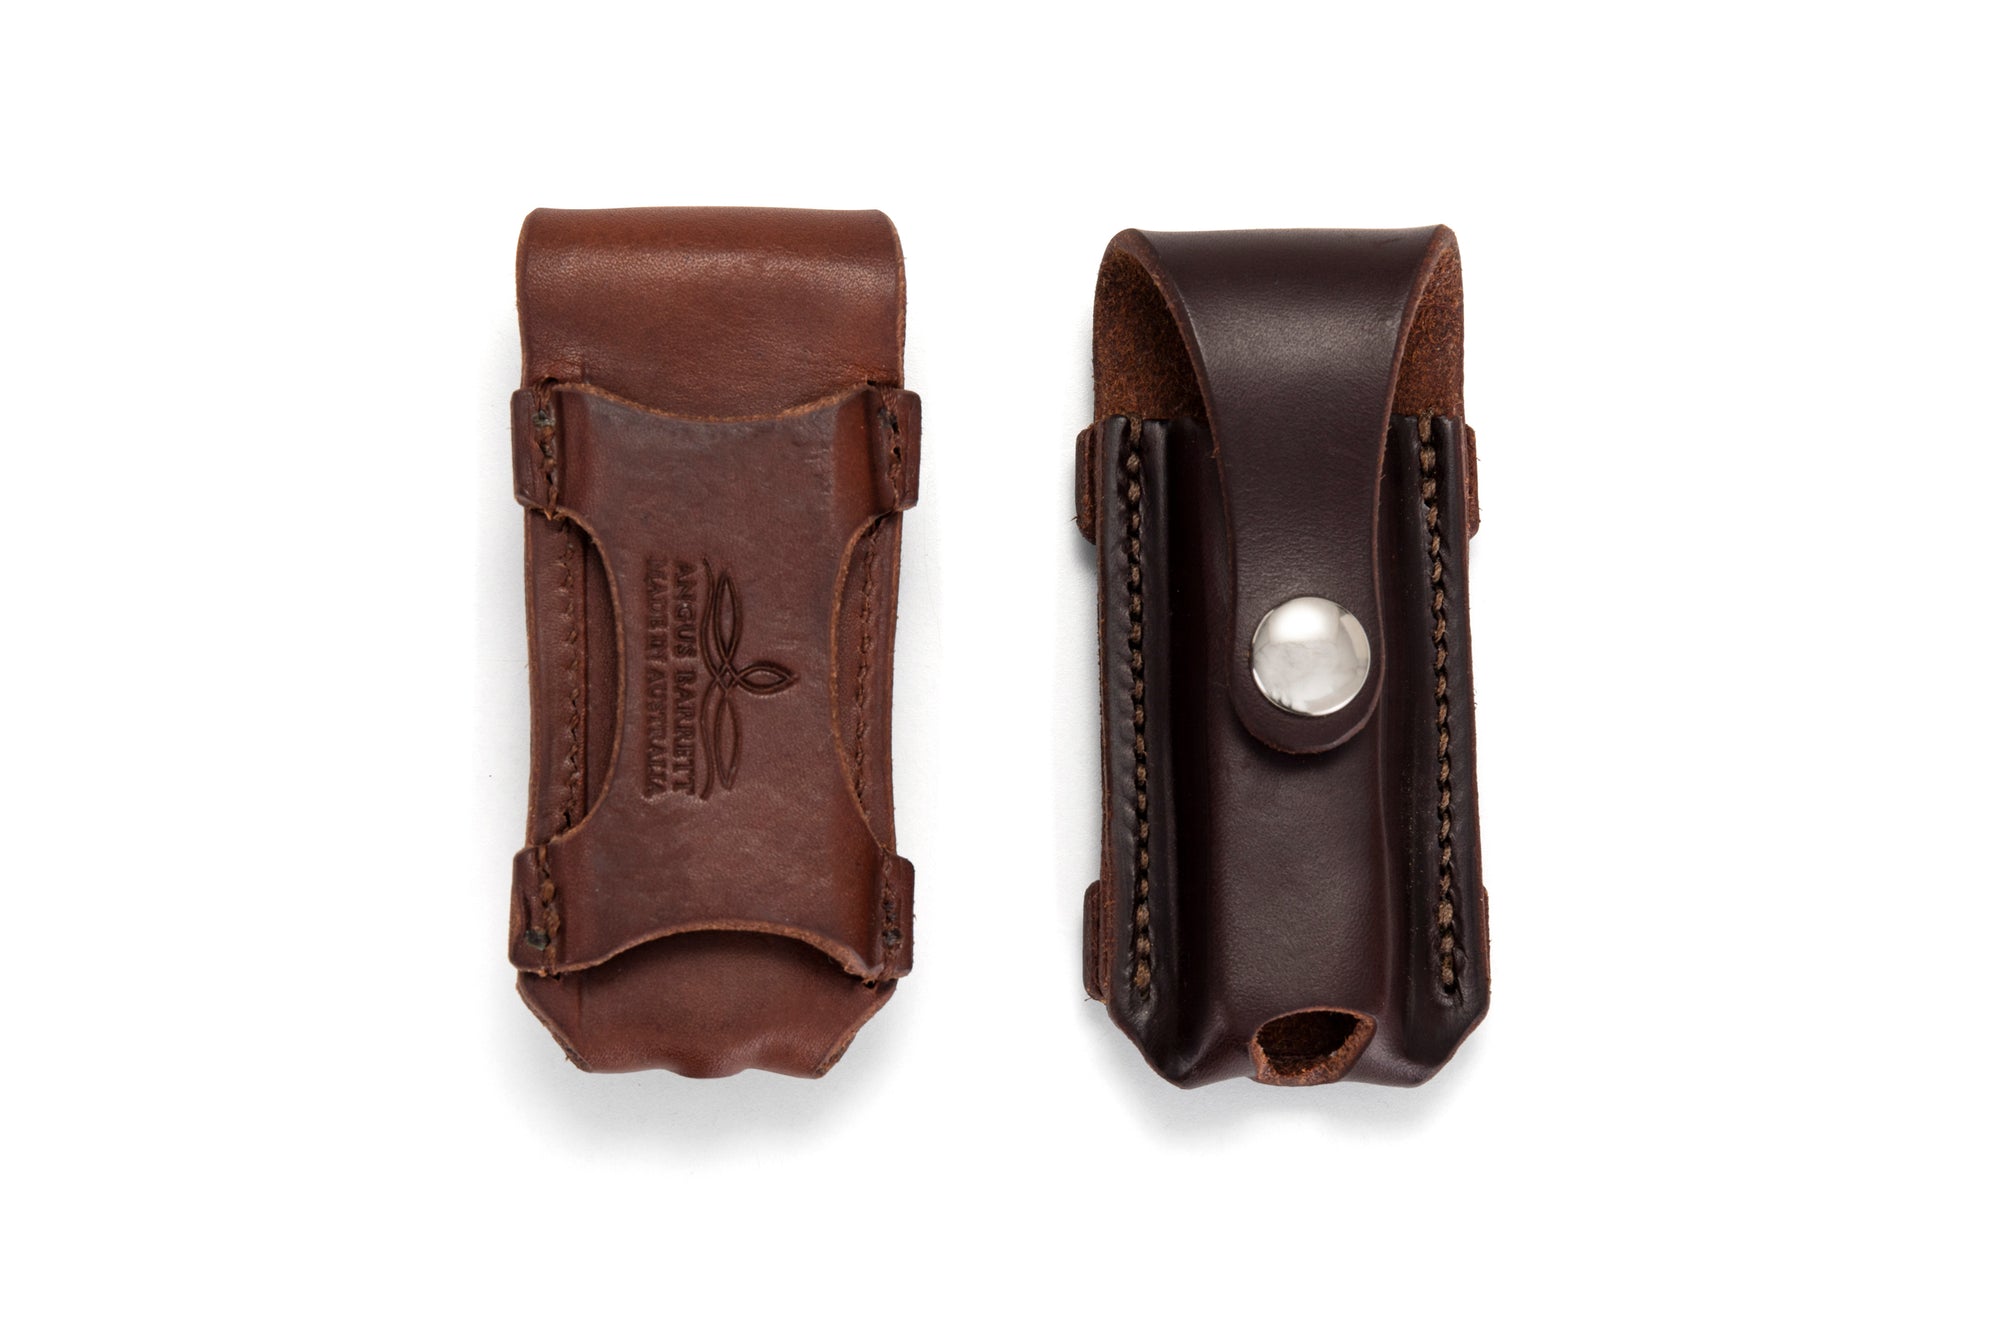 Angus Barrett Button Close Knife Pouch is available in Natural and Dark Natural